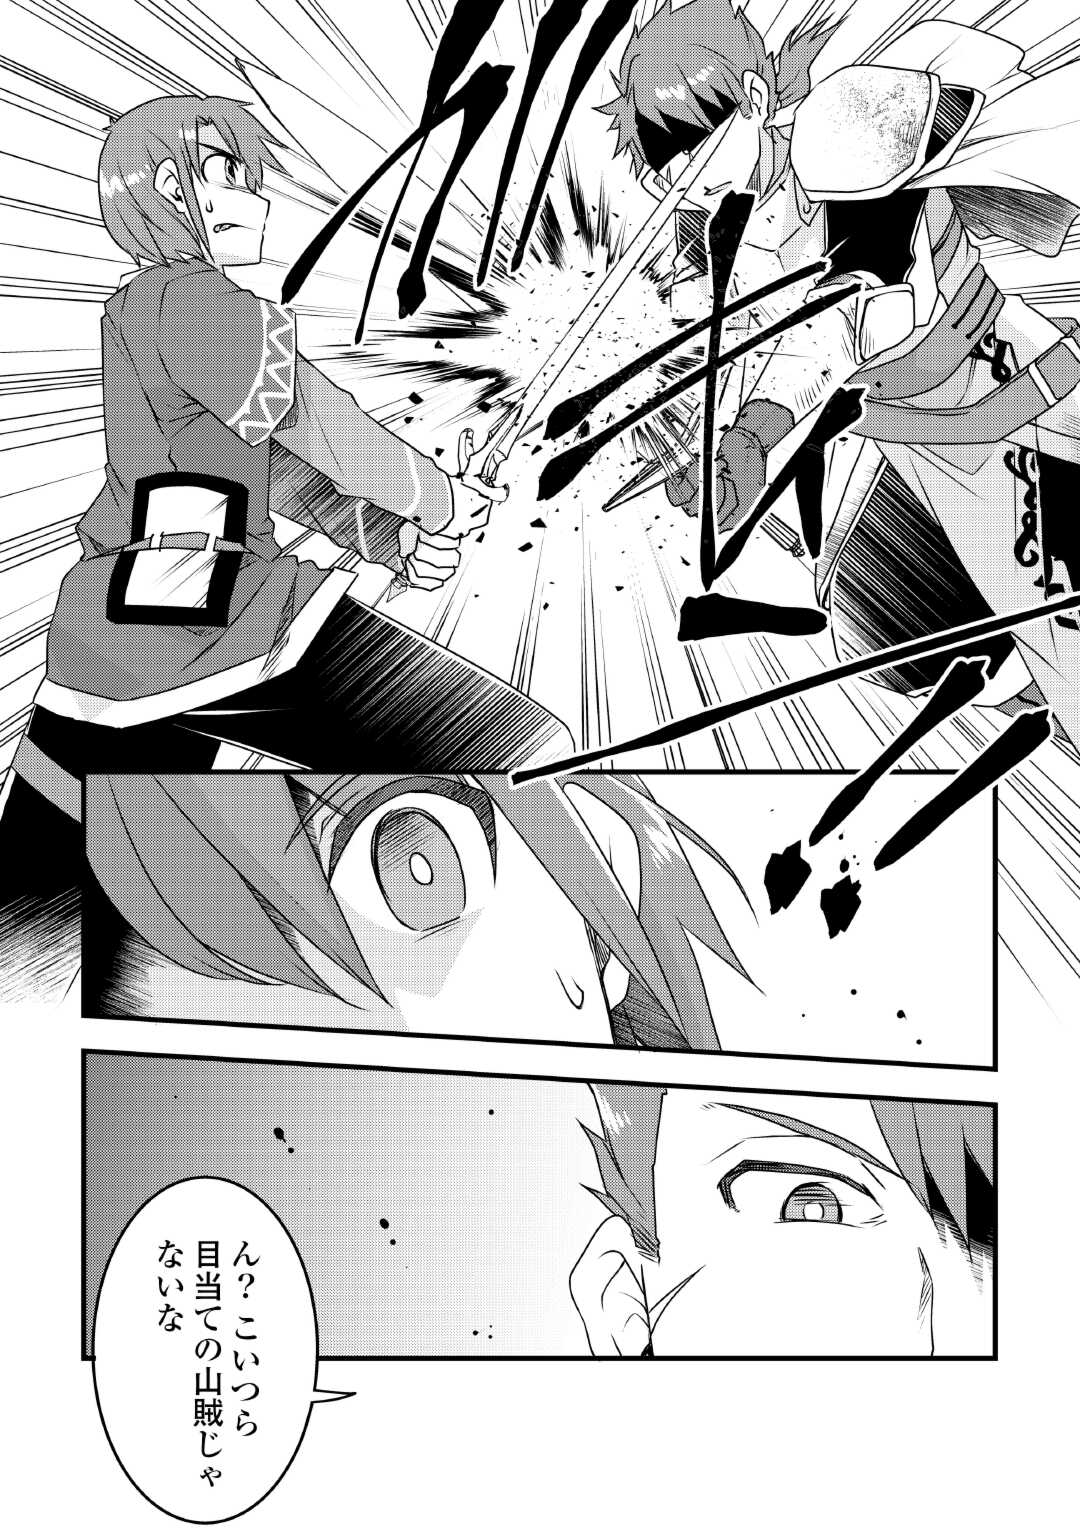 Mugen No Skill Getter! - Chapter 27 - Page 2